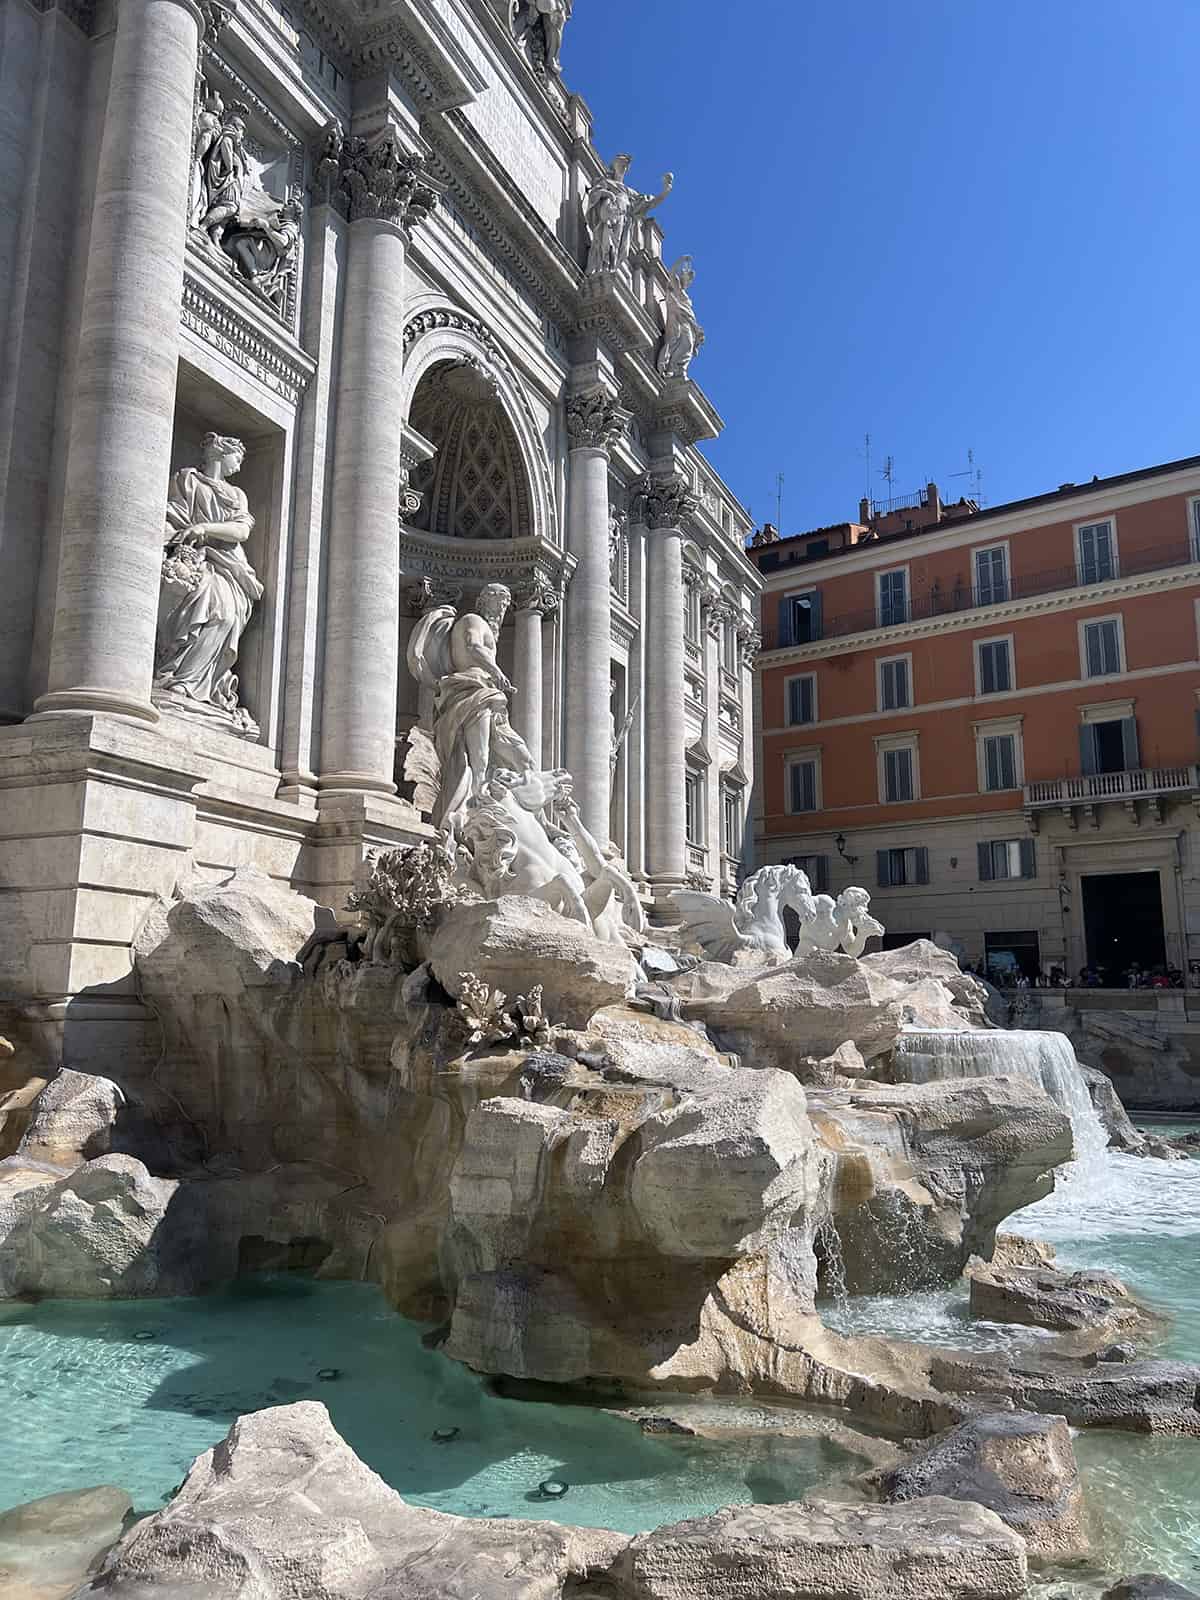 A close up shot of the Trevi Fountain in Rome, Italy